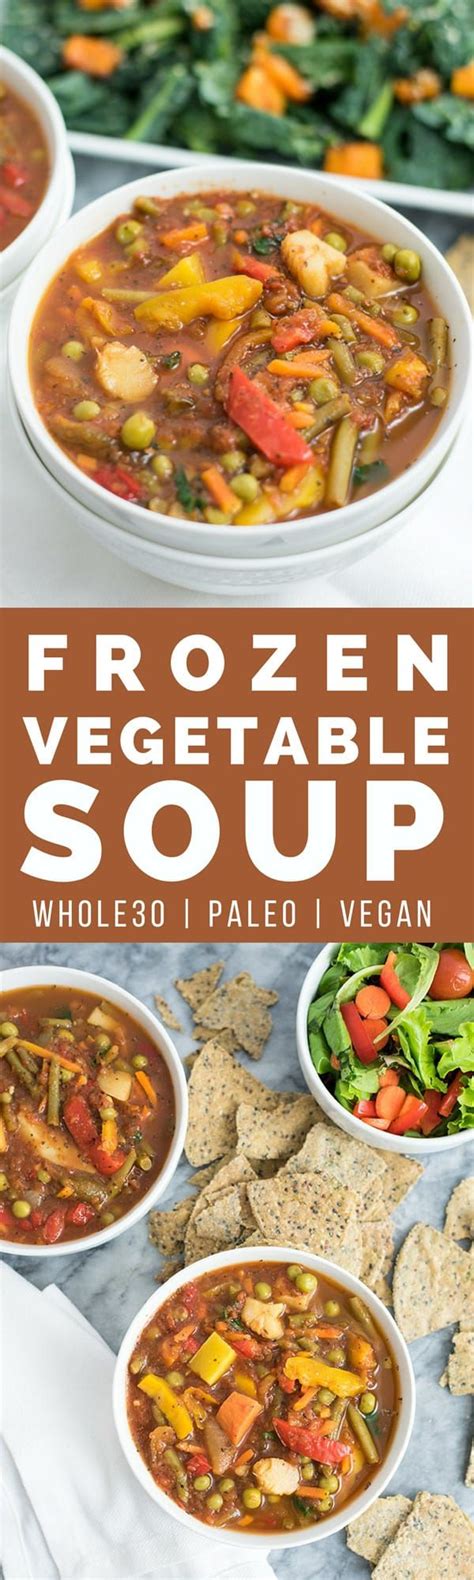 Allow 6 hours cooking time. This super simple frozen vegetable soup is ready in under 30 minutes and doesn't require any ...